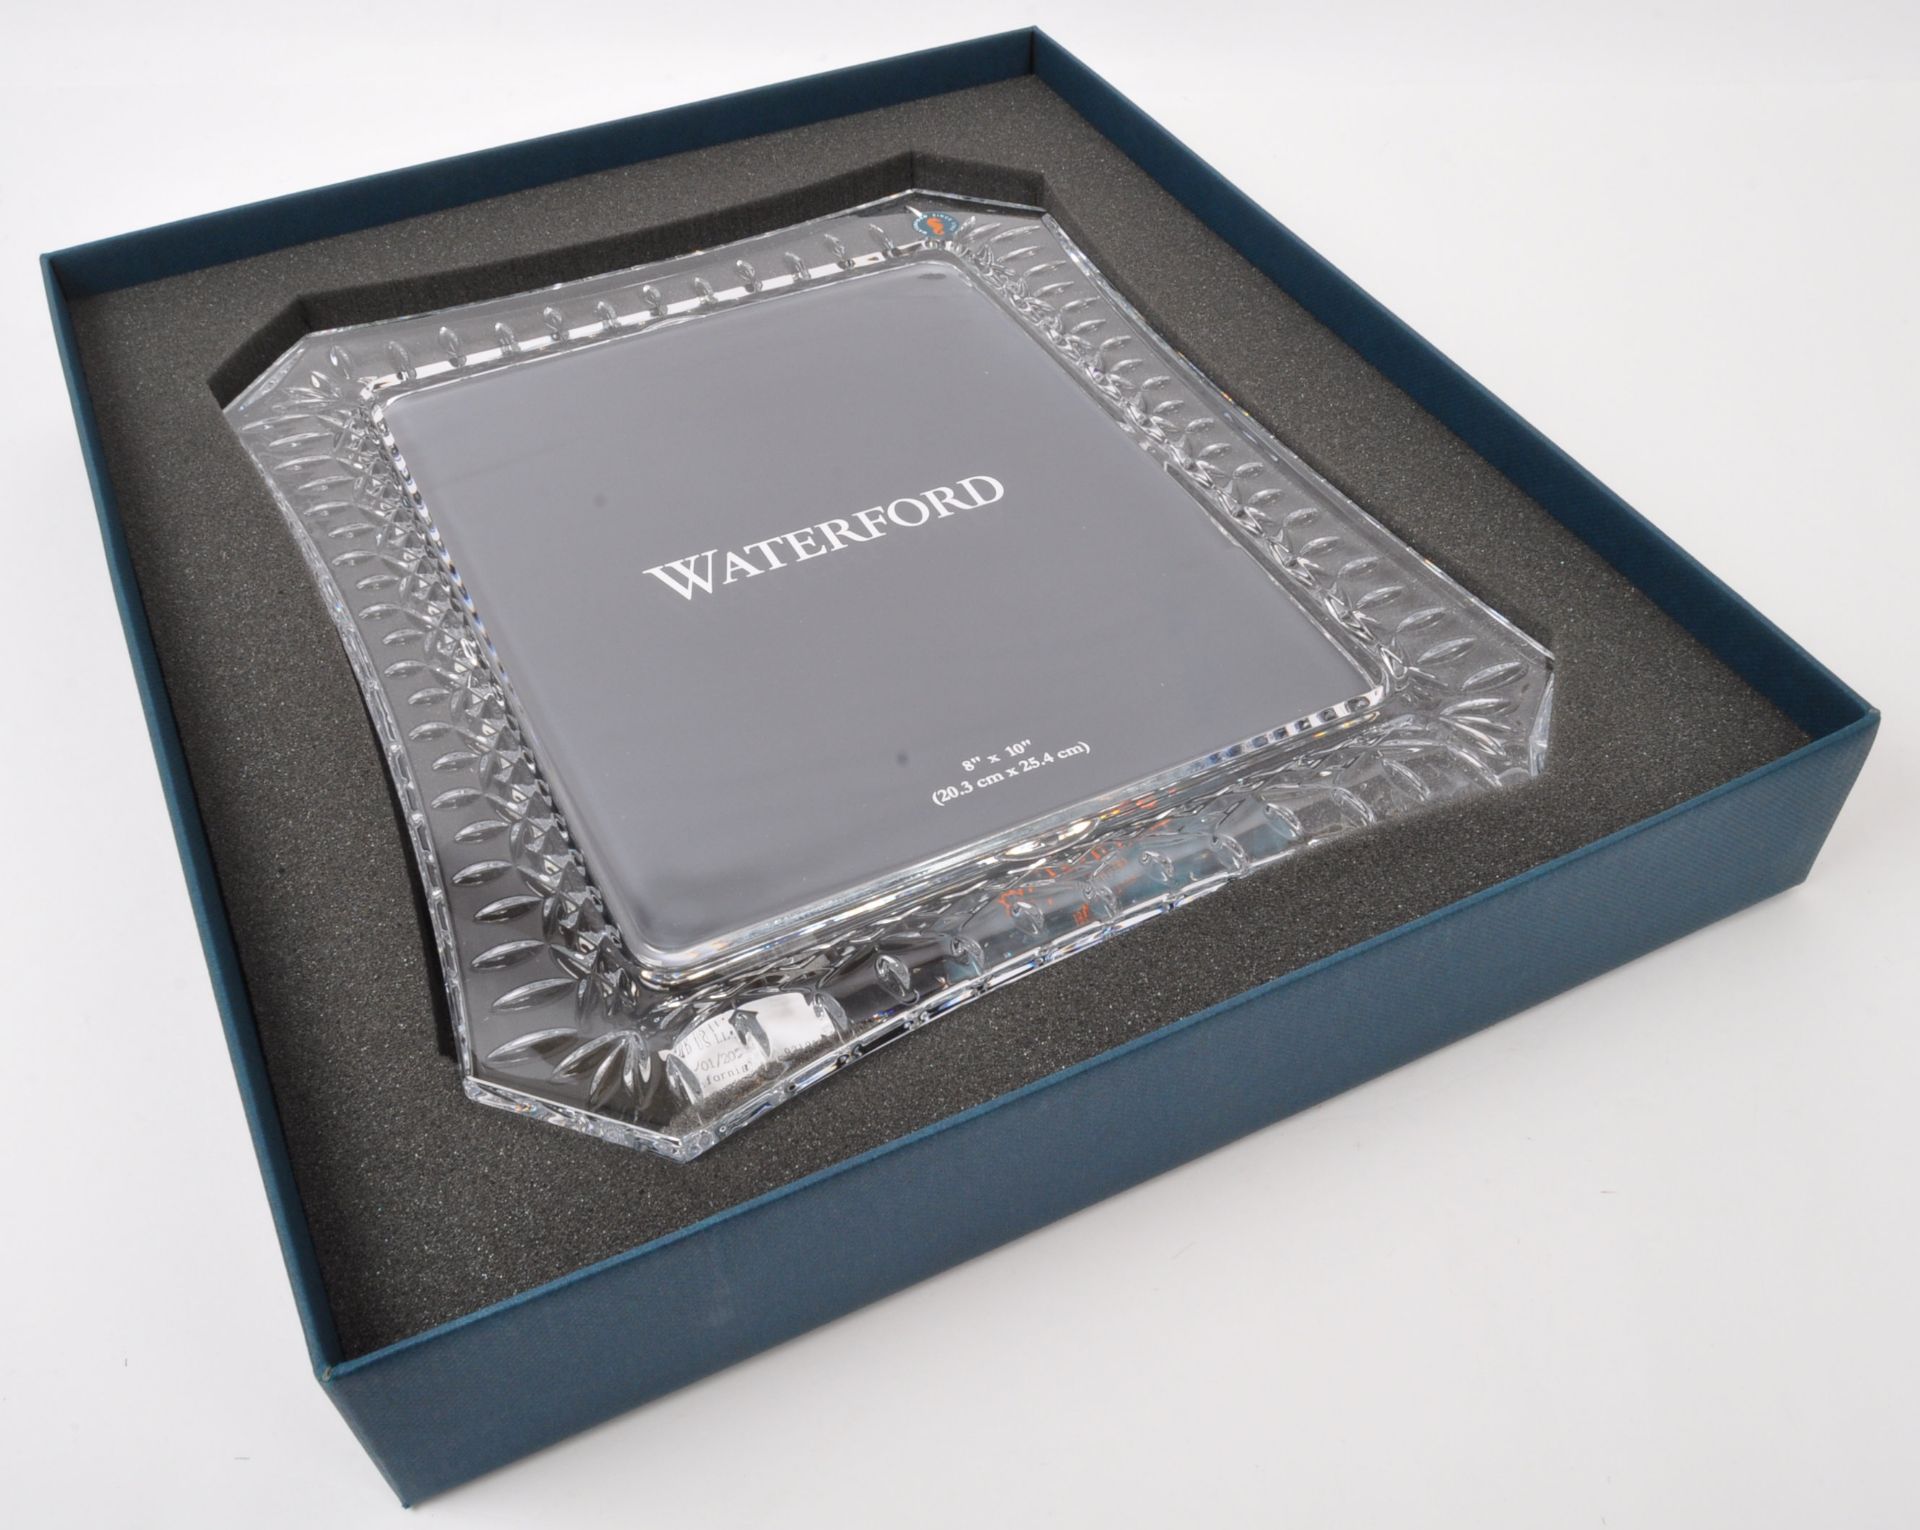 NOS WATERFORD CRYSTAL LISMORE PHOTO FRAME - Image 2 of 6